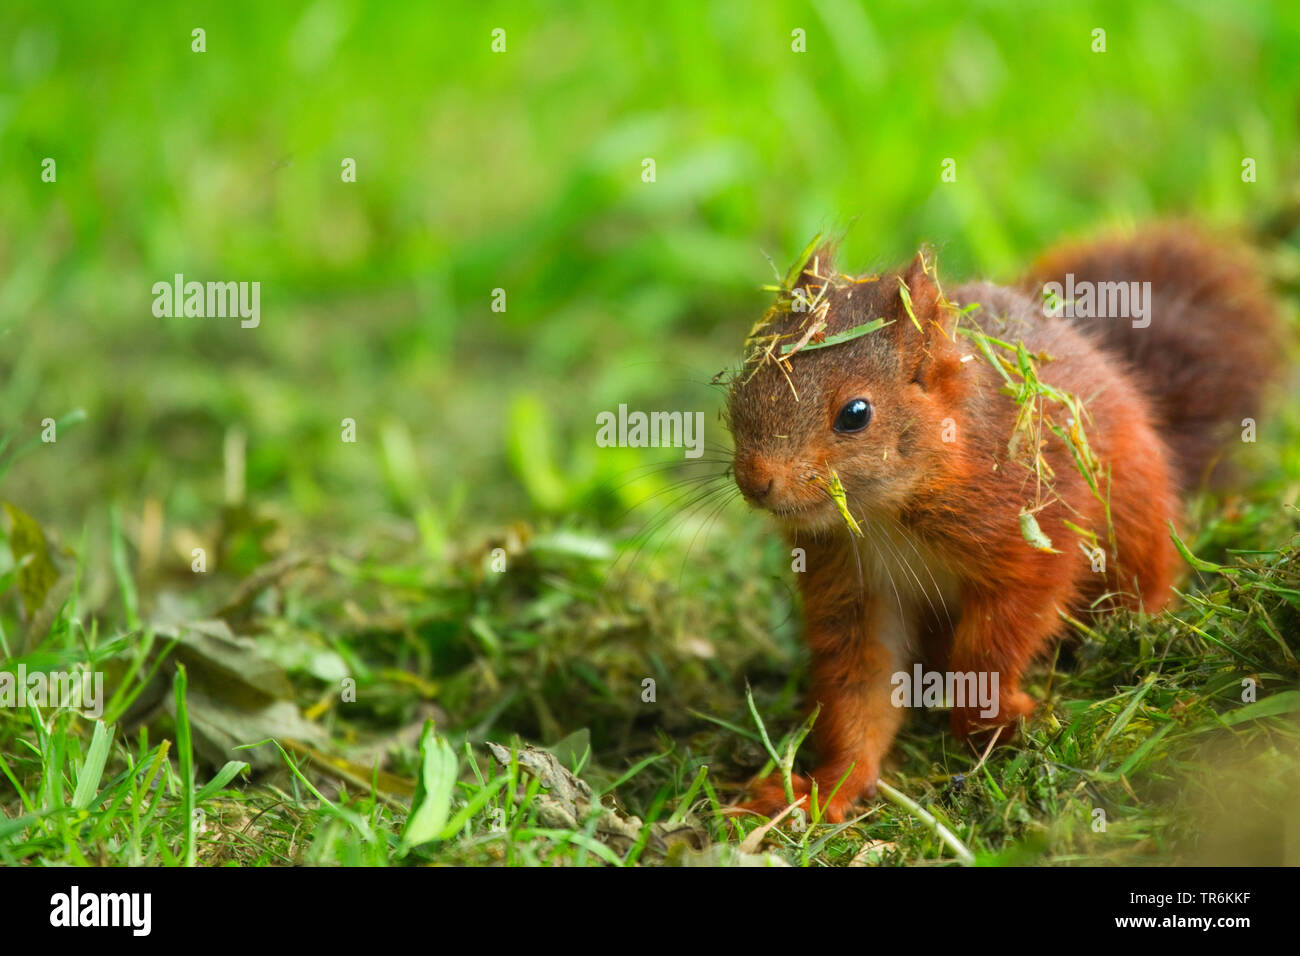 European red squirrel, Eurasian red squirrel (Sciurus vulgaris), gras-covered juvenile searching for food on the ground, Germany Stock Photo